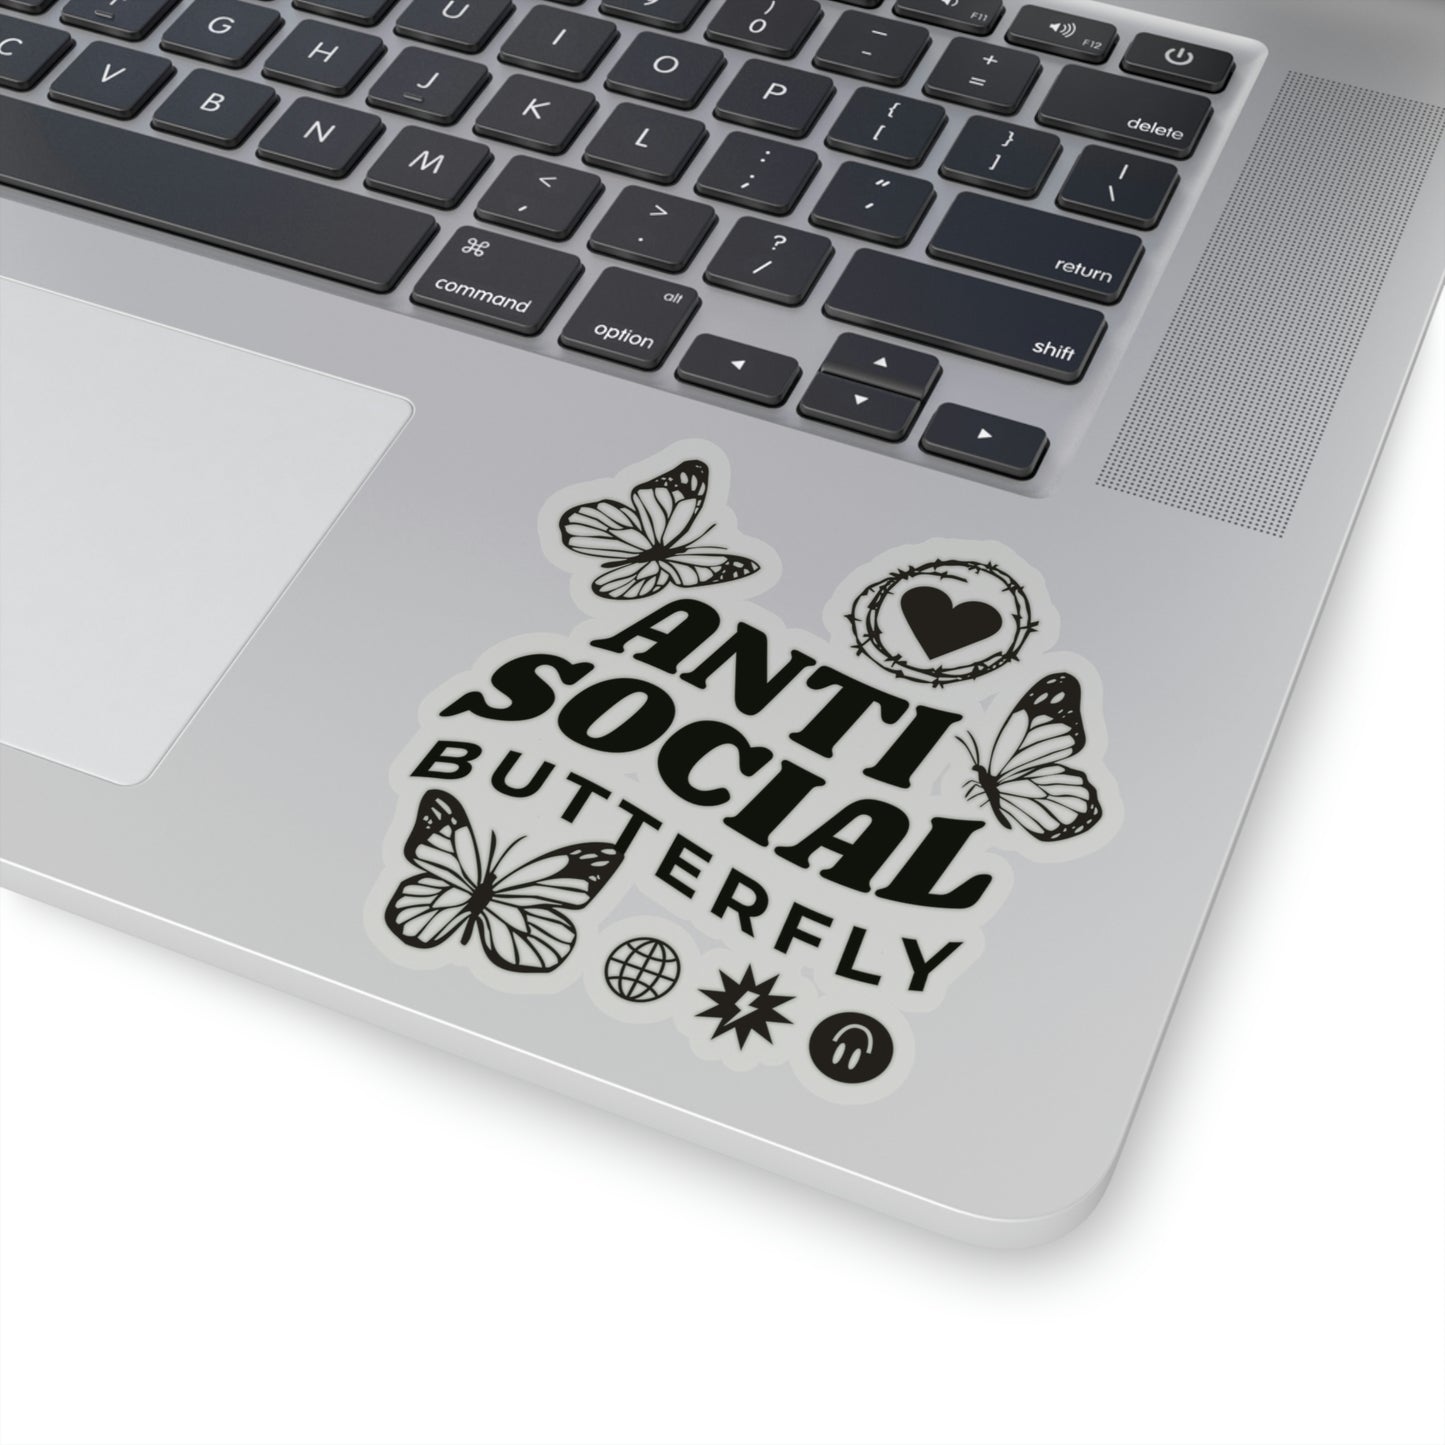 Anti Social Butterfly, Goth Aesthetic Sticker